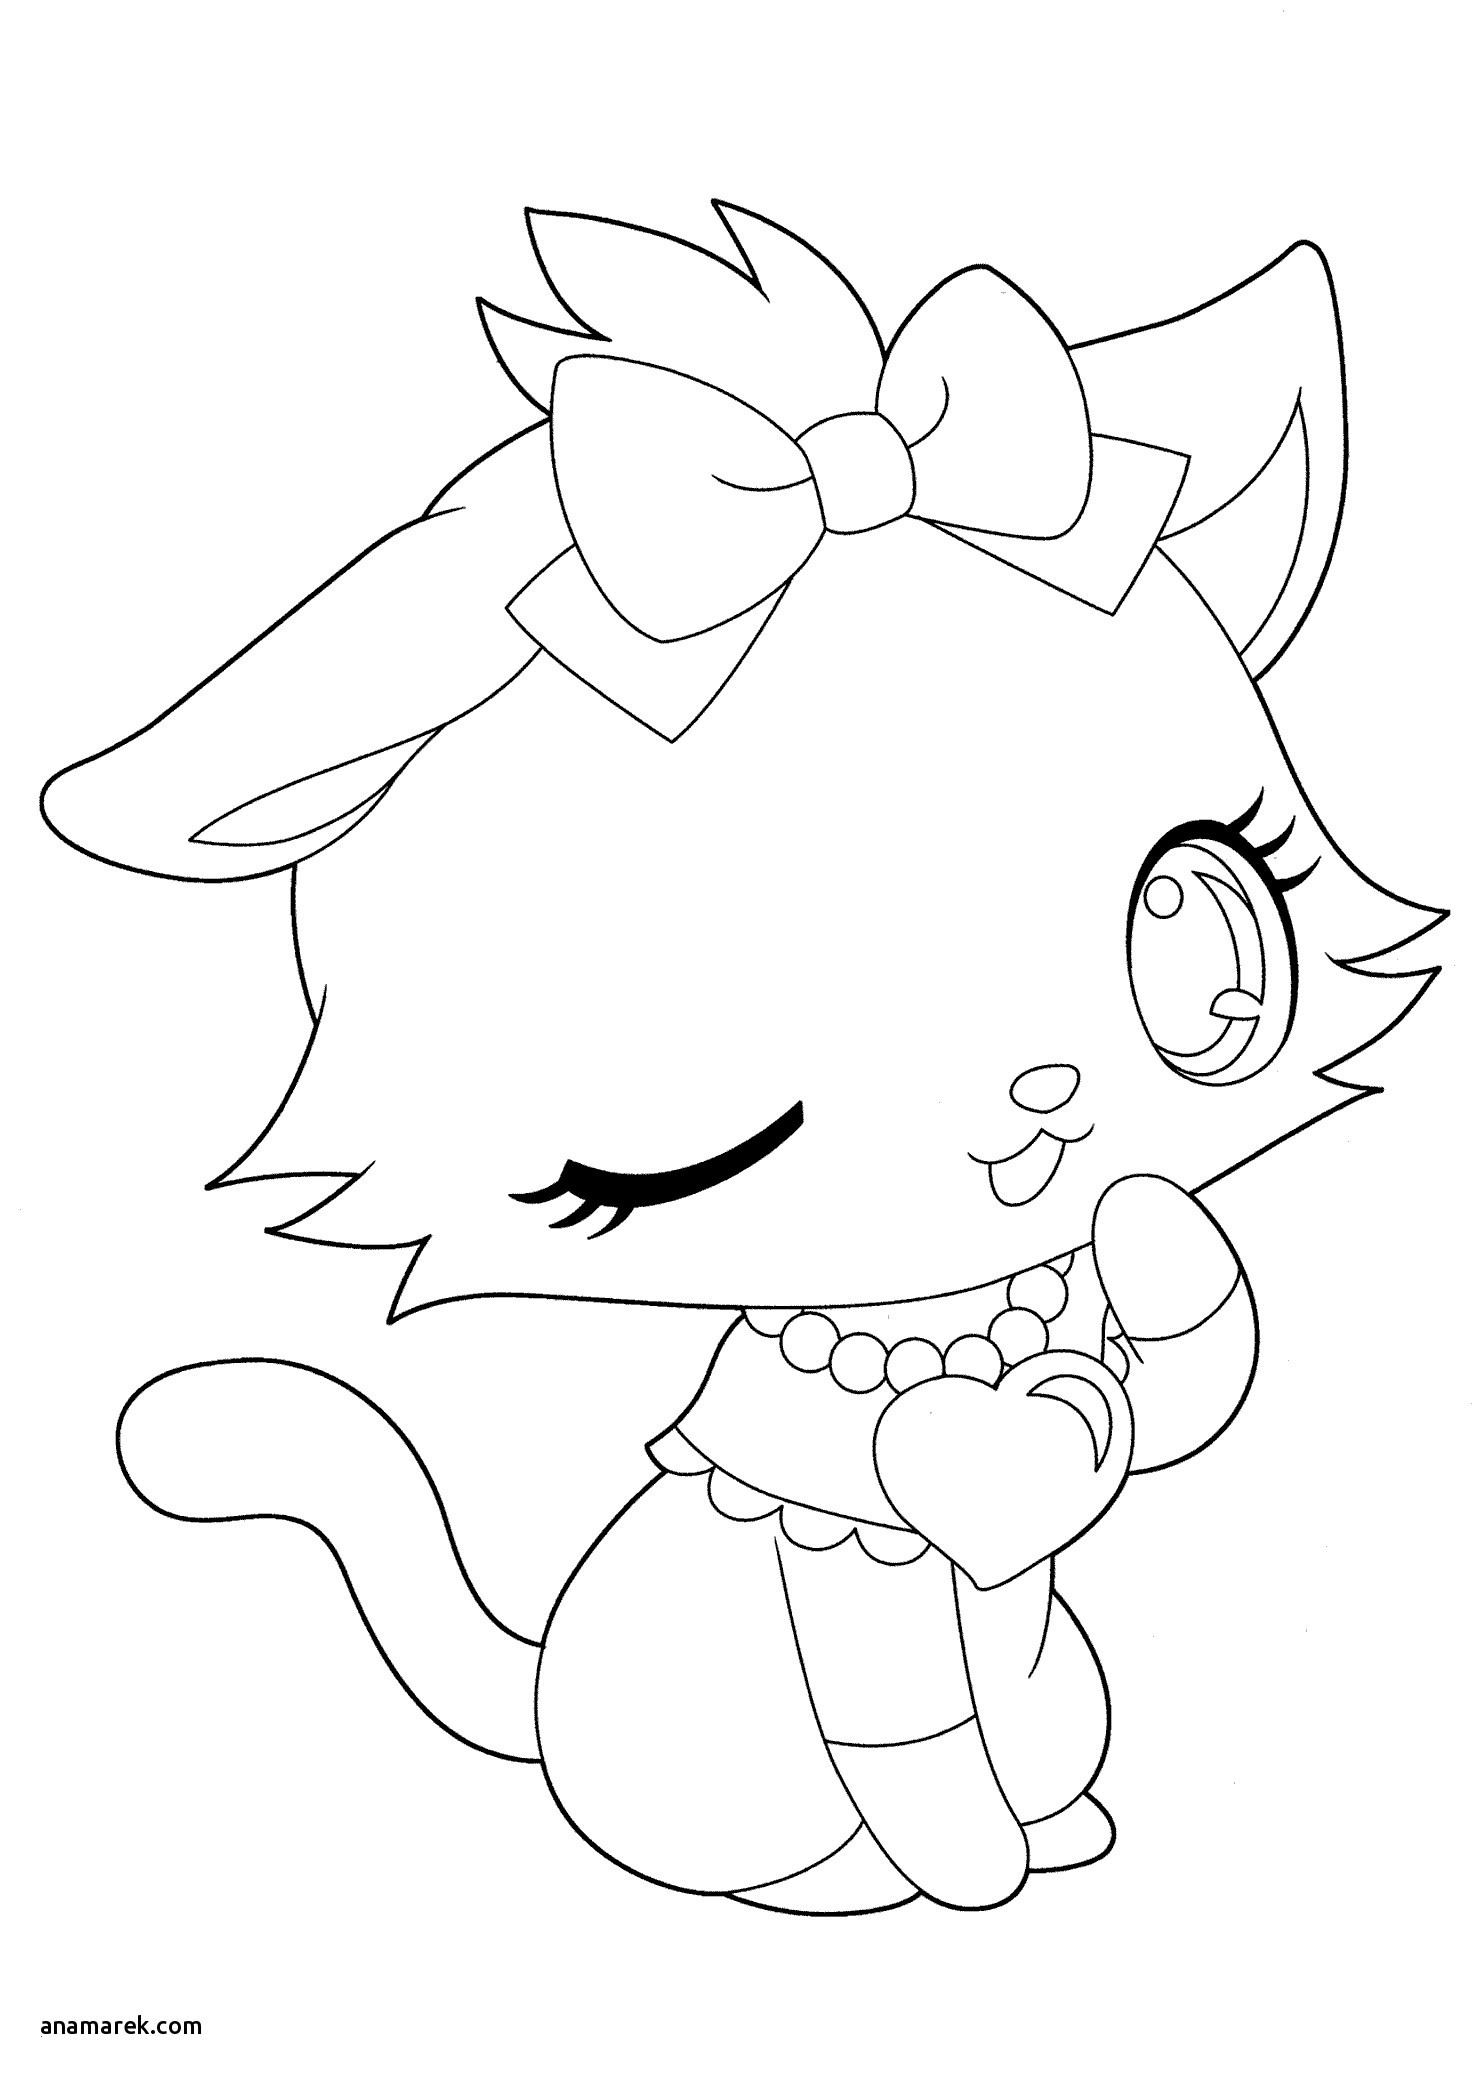 Kitty Cat Coloring Pages Printable Beautiful Kitty Cat Coloring Pages Coloring Page